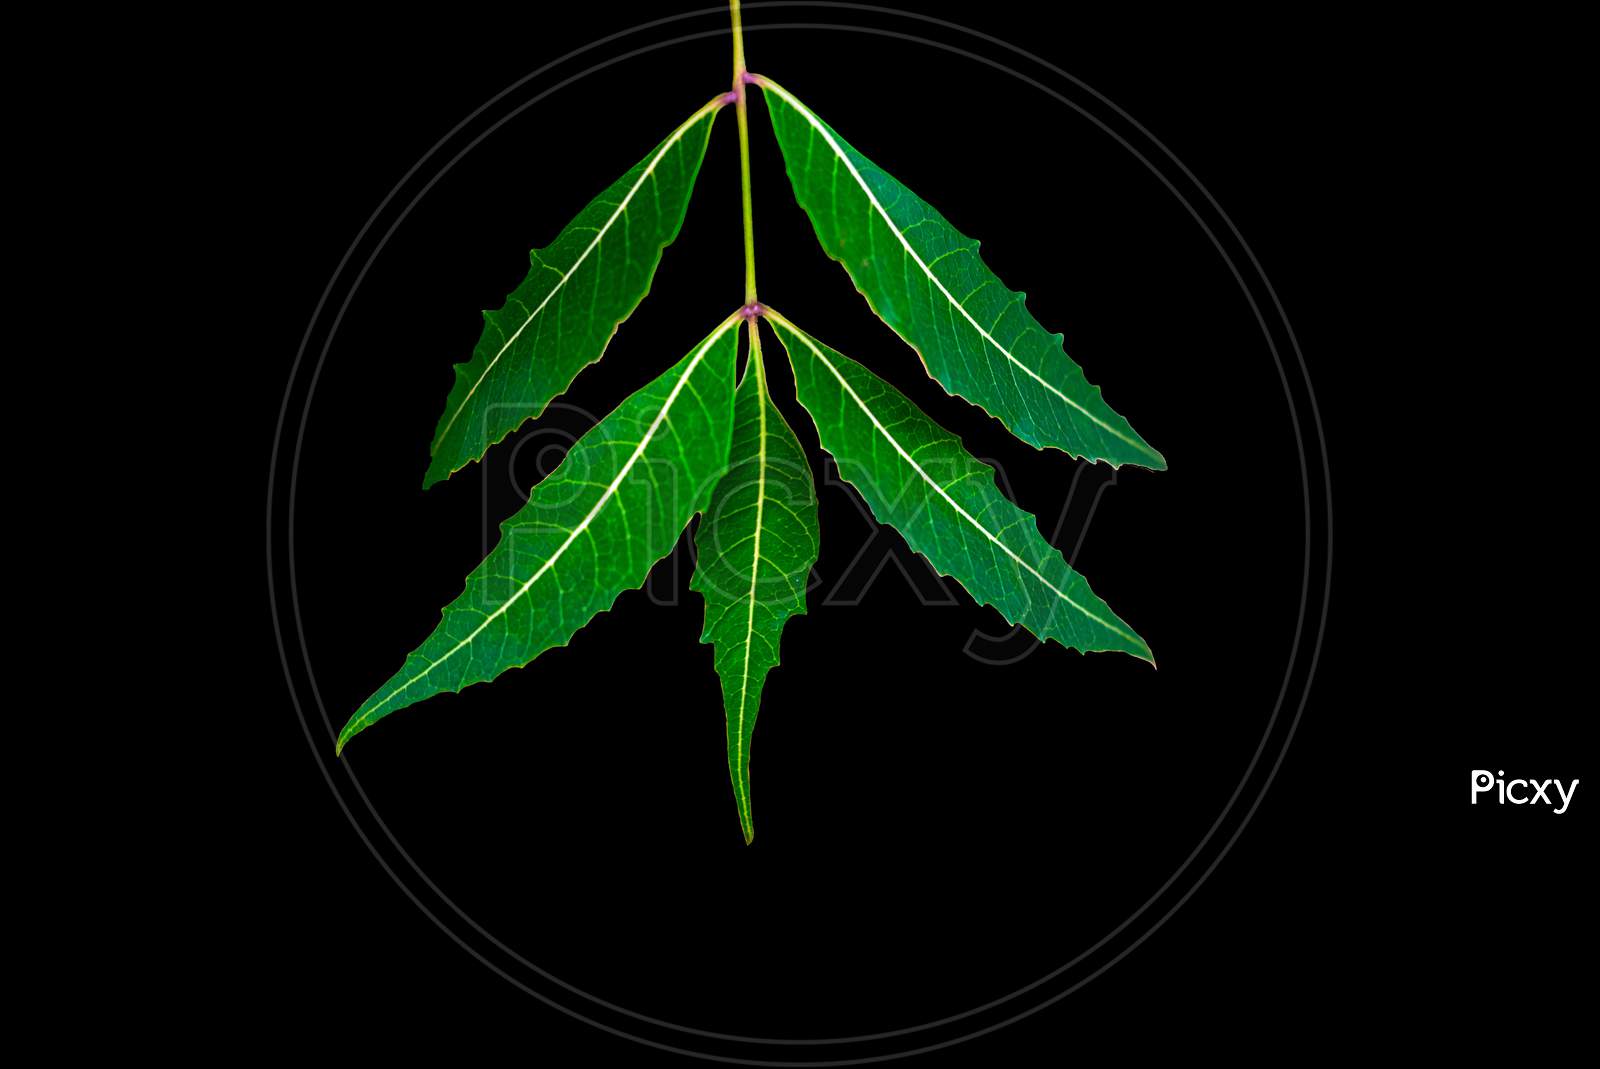 Neem Leaf Or Azadirachta Indica Leaf Isolated With Black Background